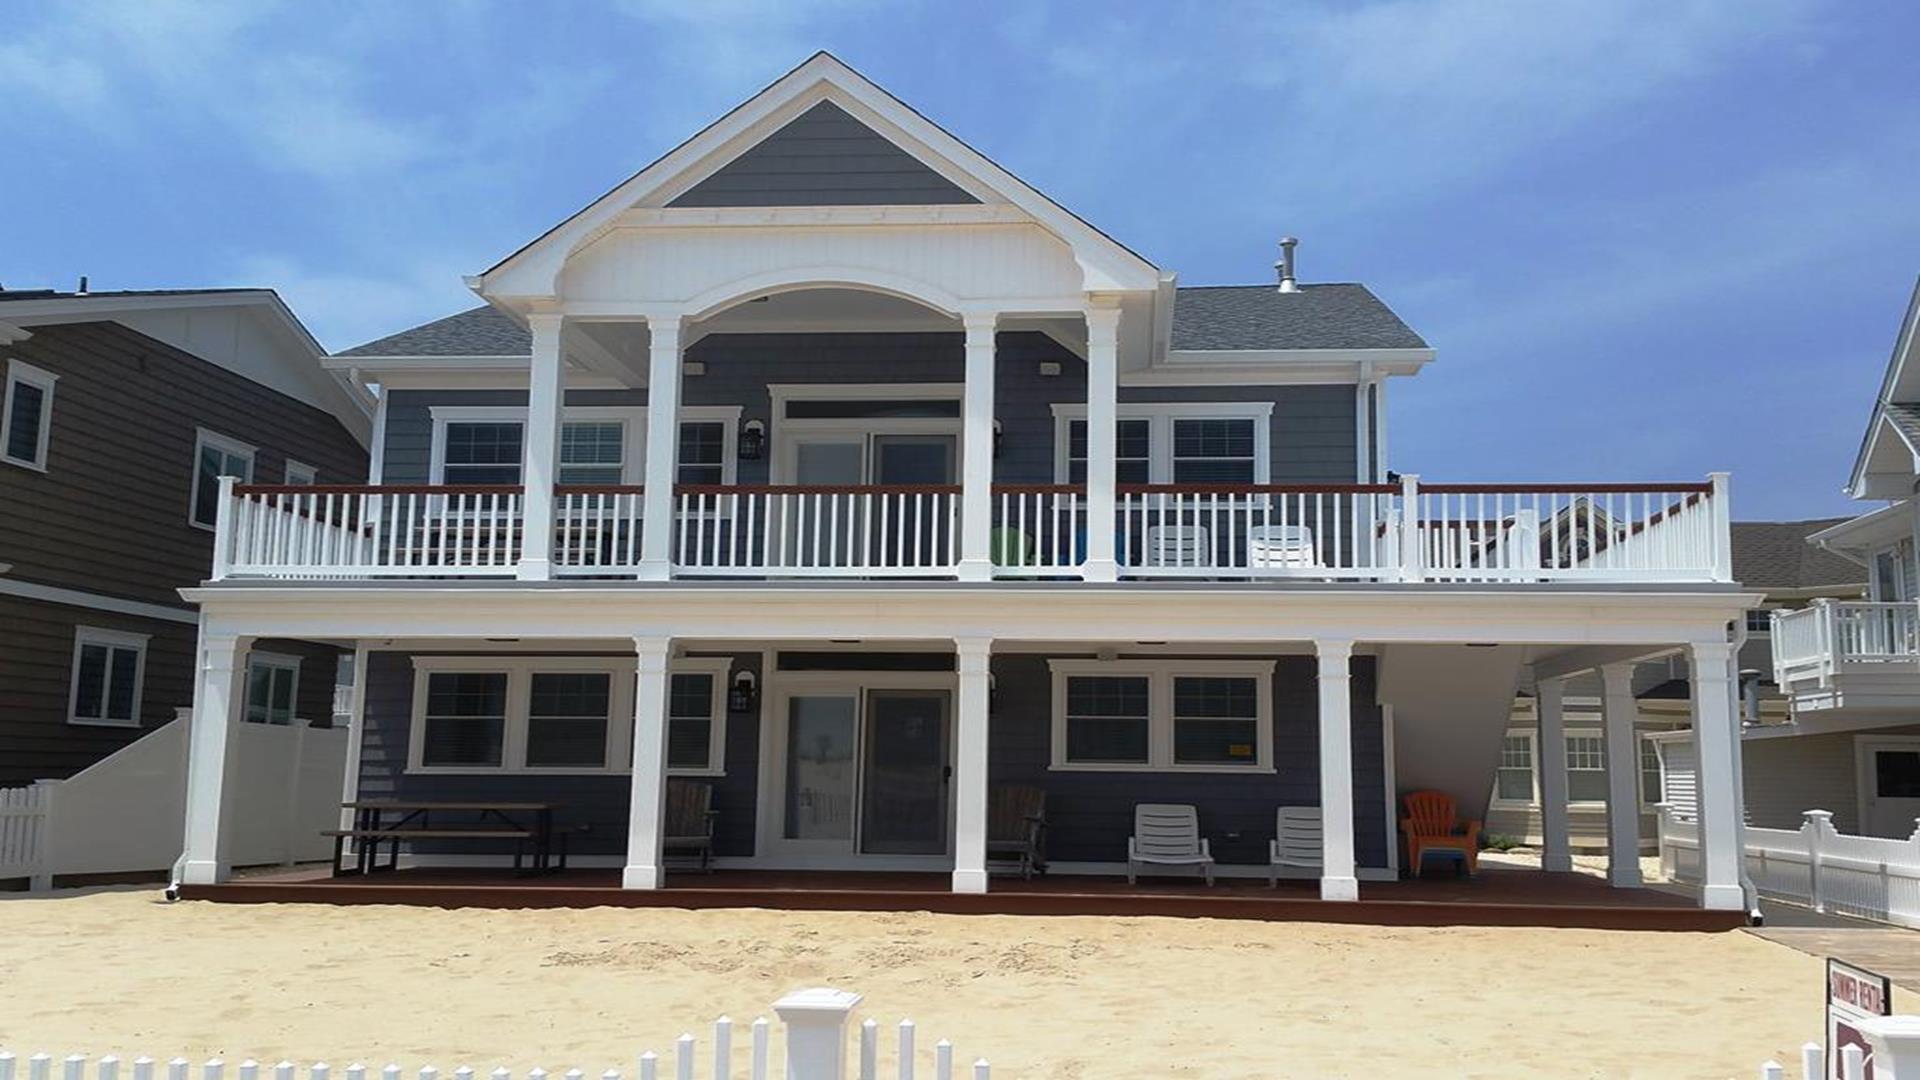 Ocean Front Home in Lavallette